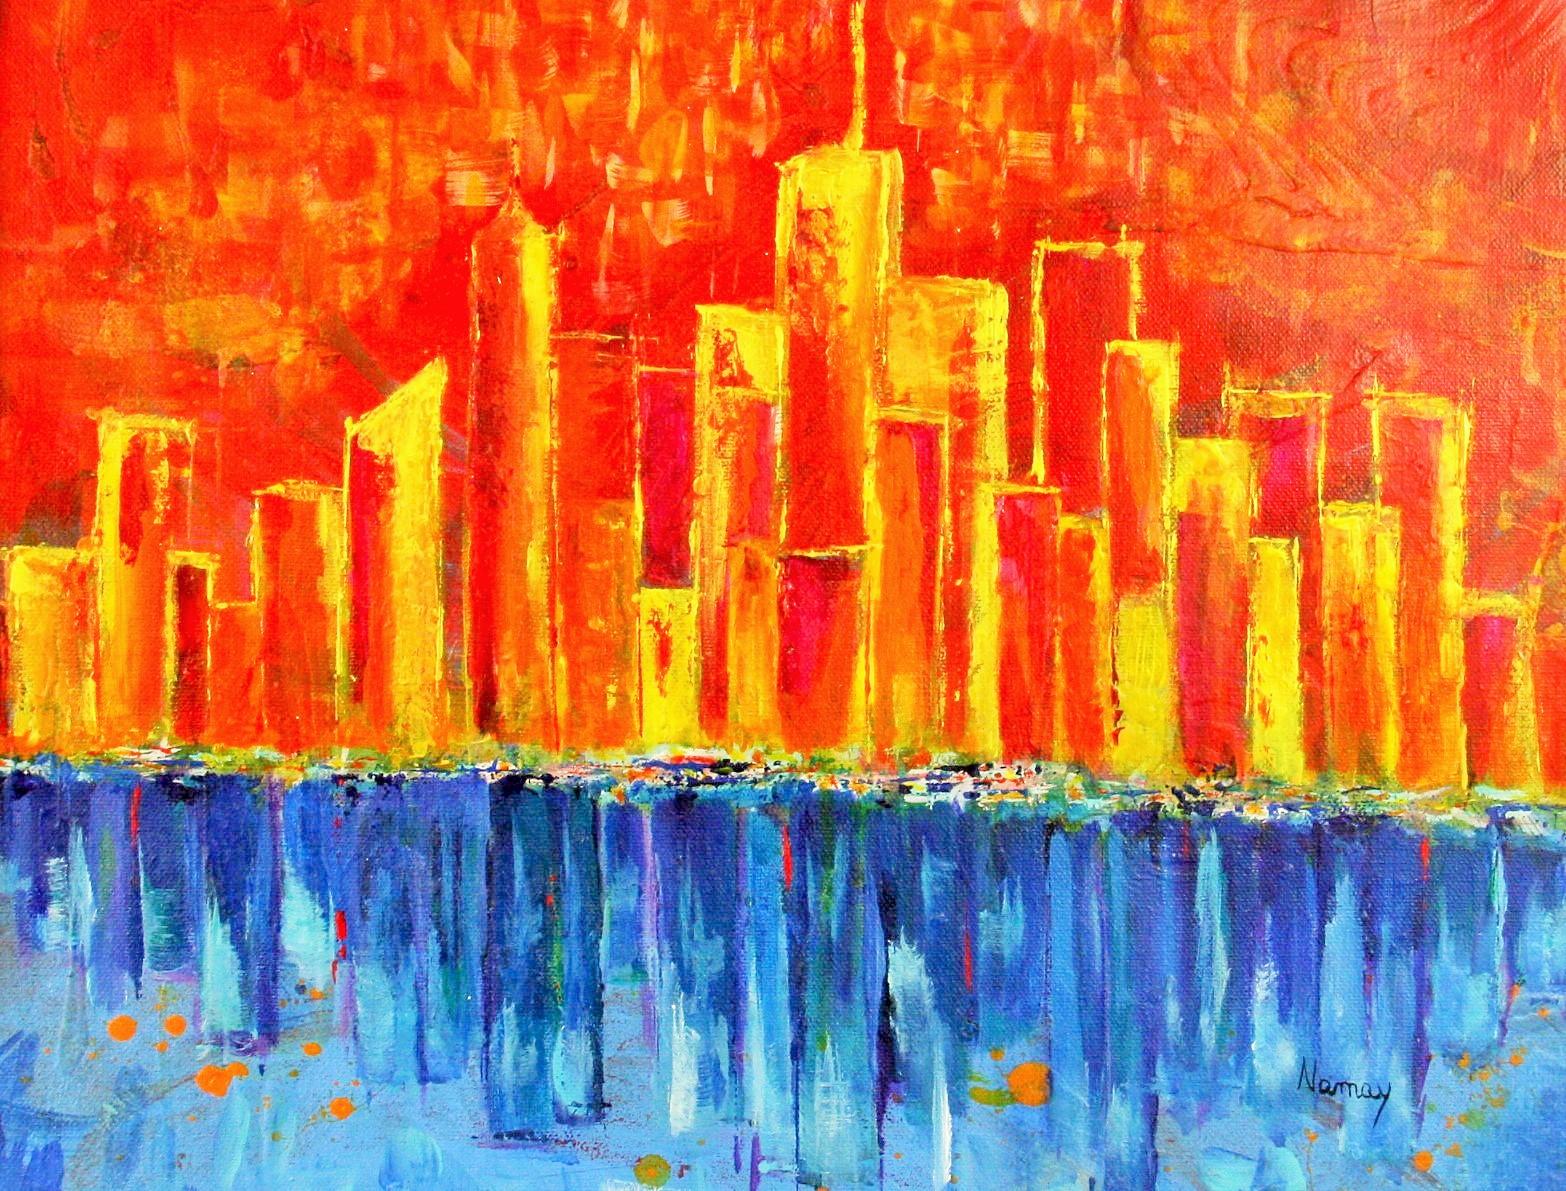 NYC Modern City River View Abstract Landscape - Painting by Namay